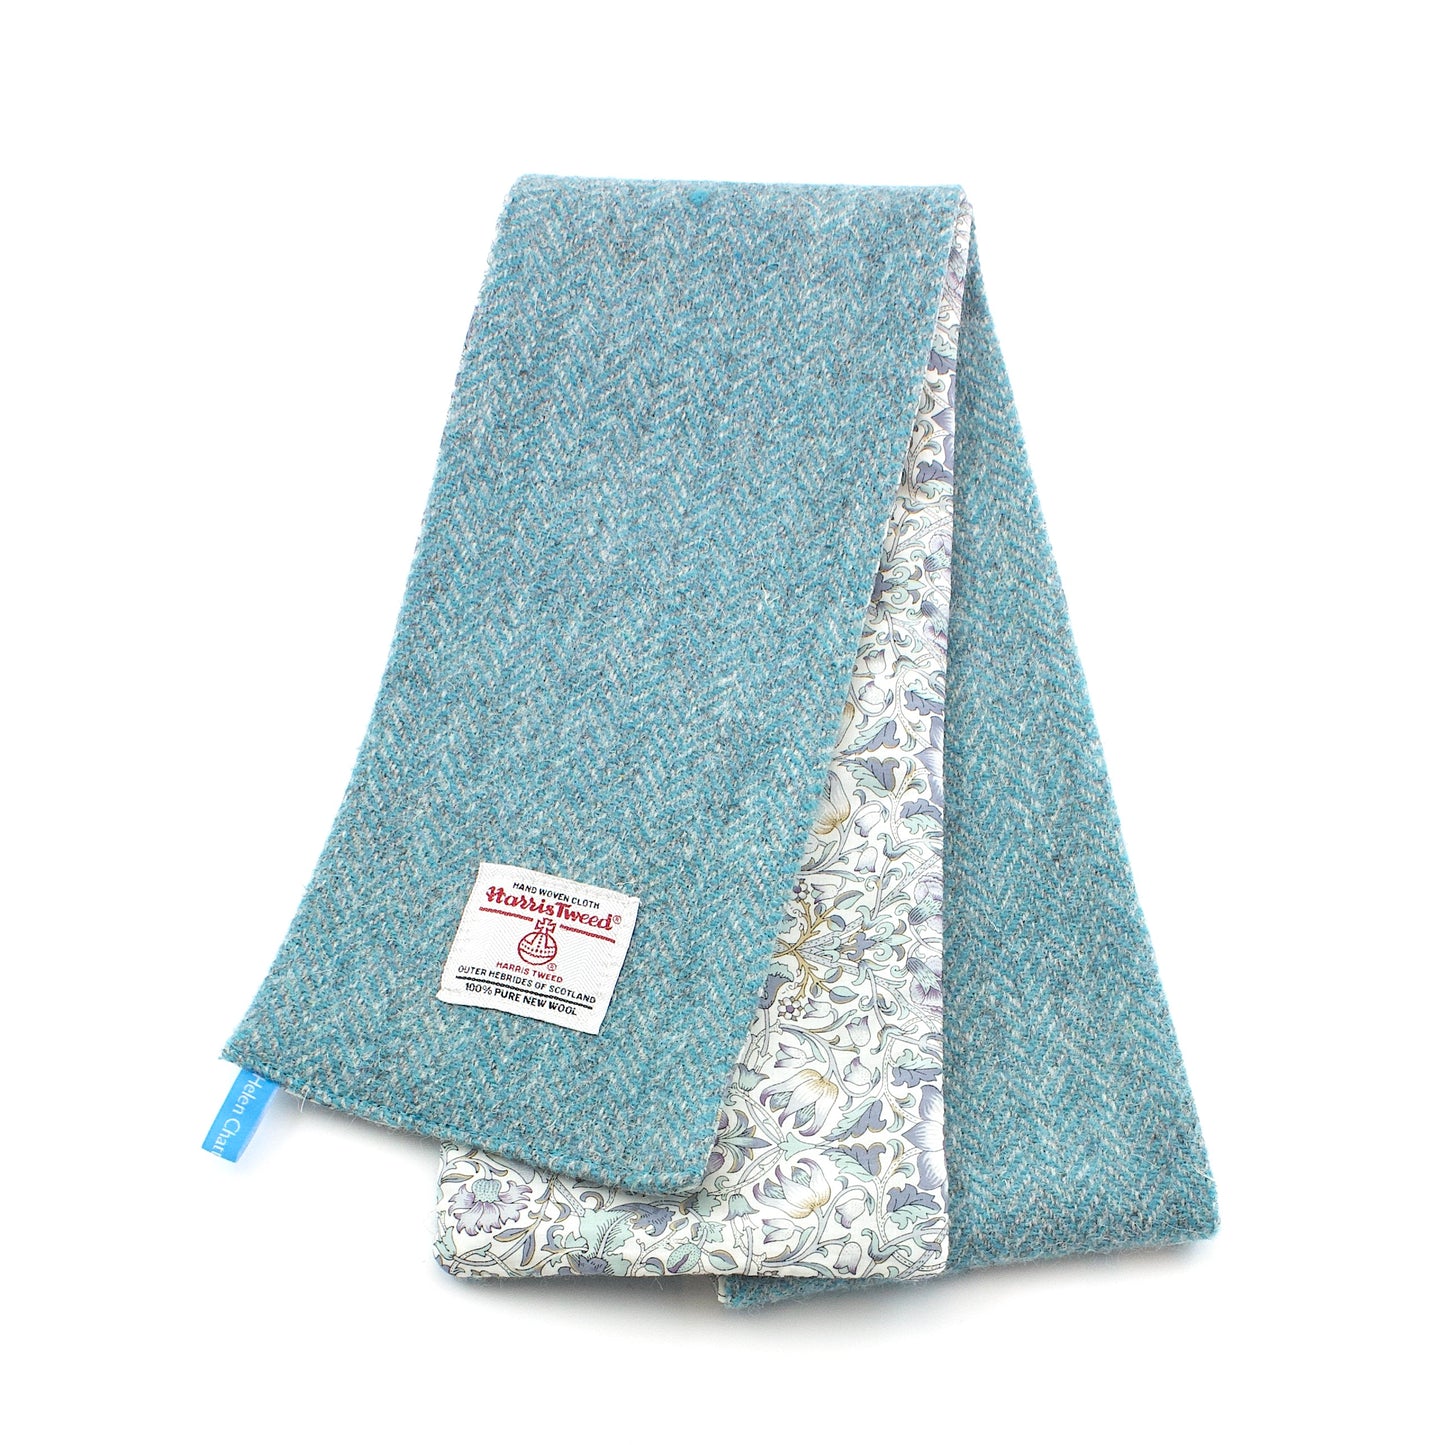 Chatterton Harris Tweed and Liberty Cotton Skinny Scarf -  Blue and Silver Herringbone